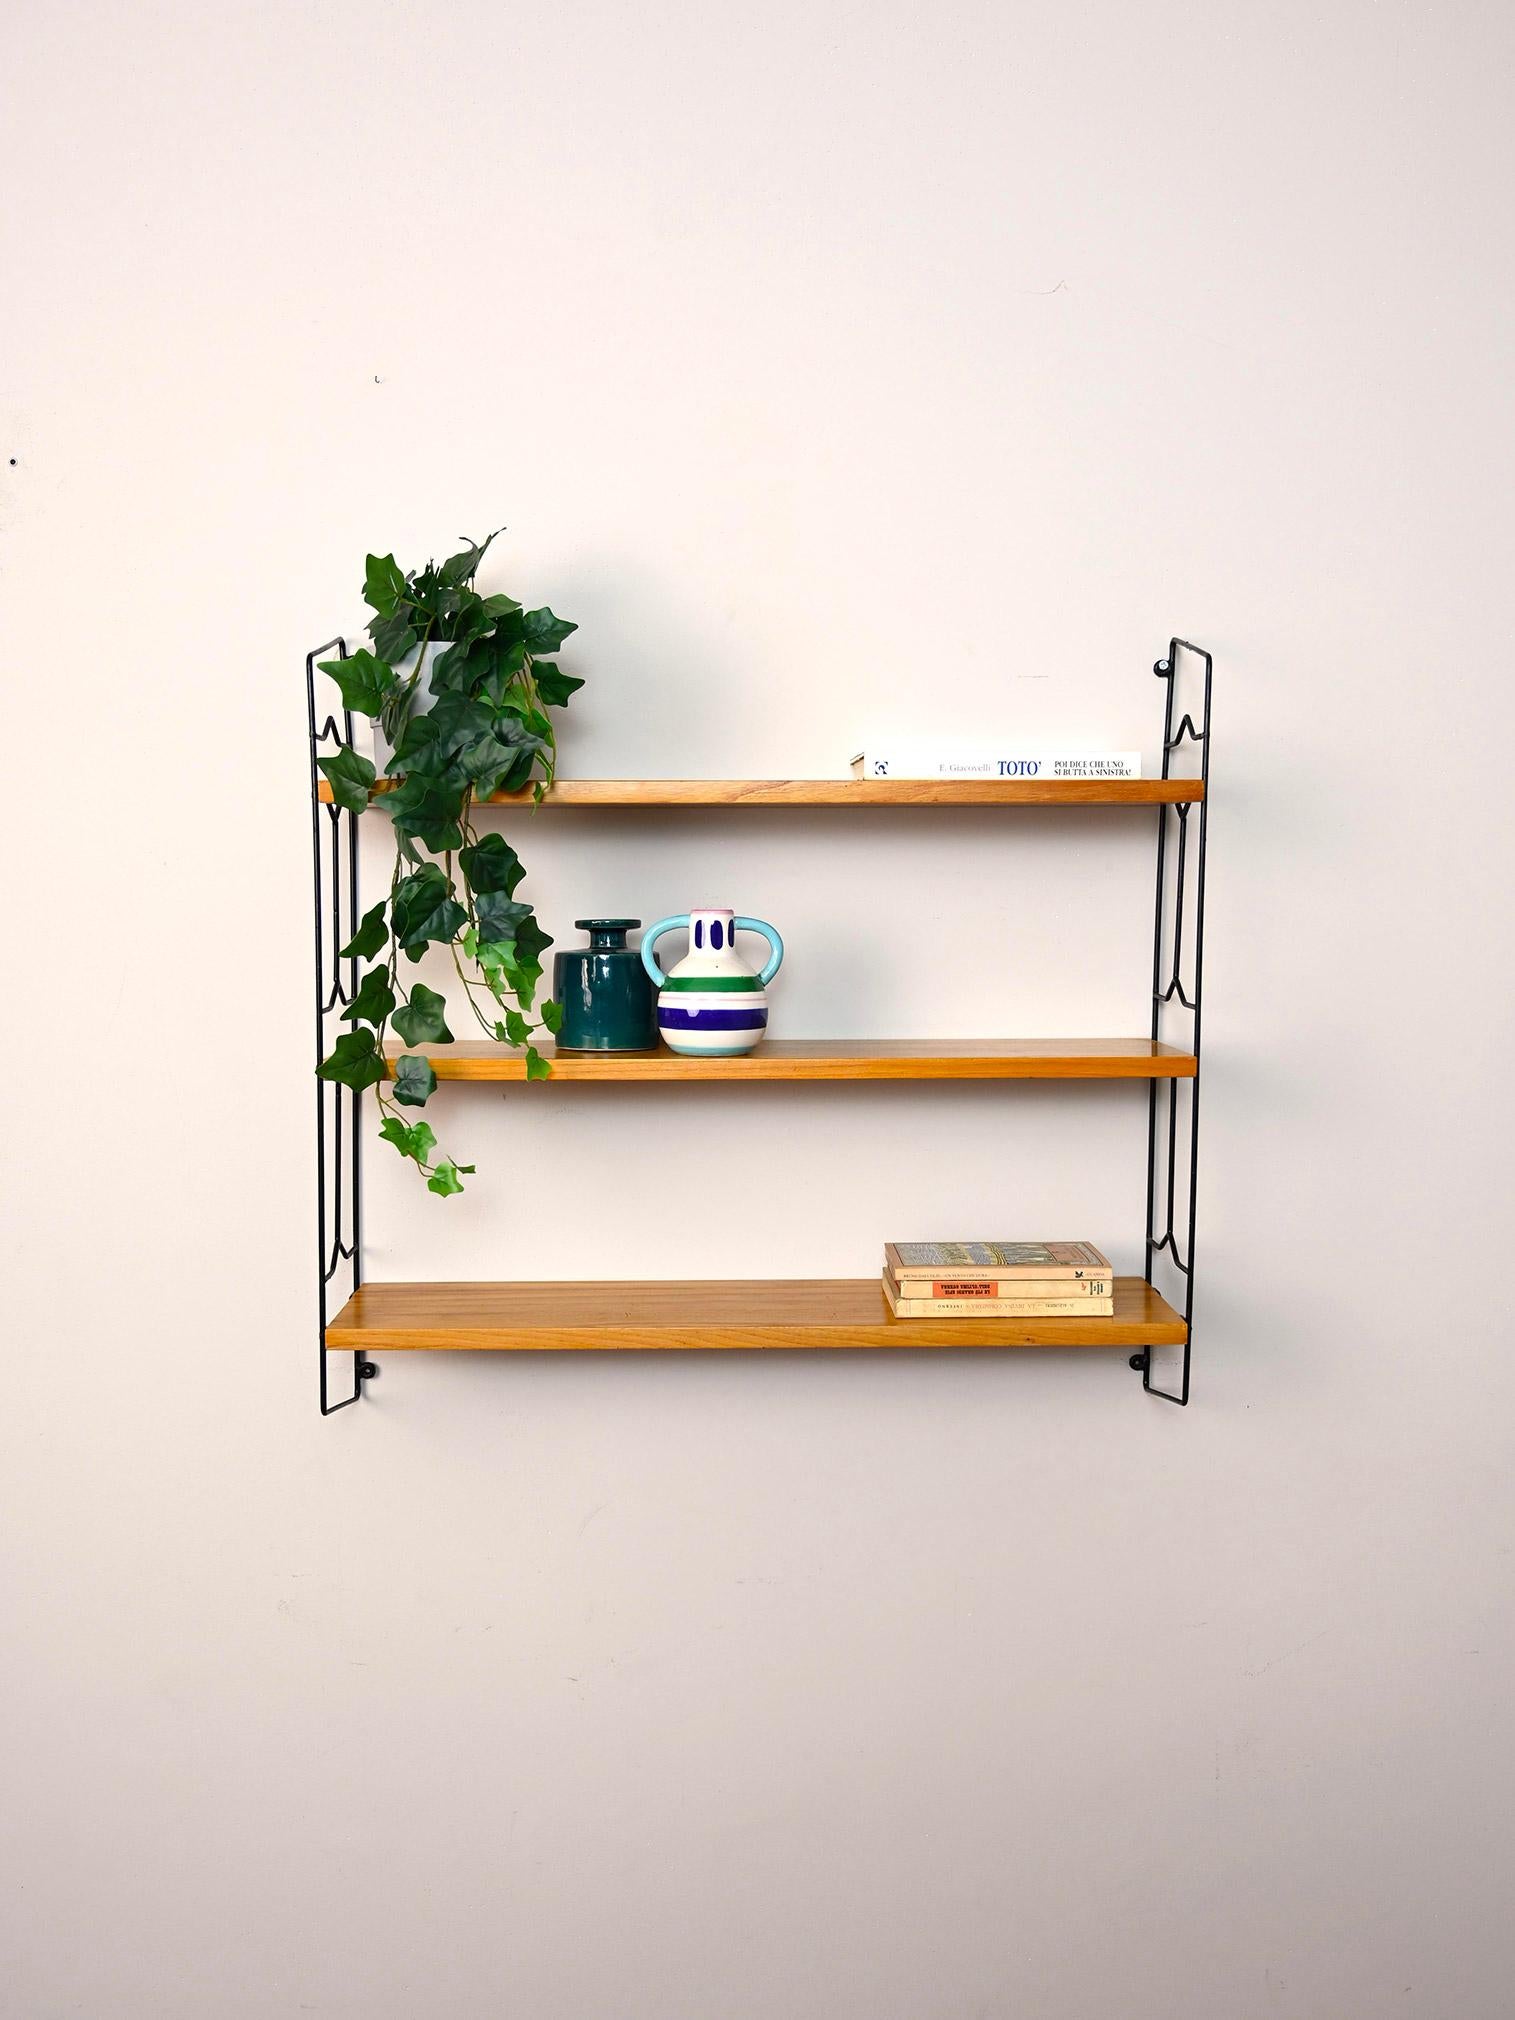 Original Scandinavian shelves from the 1960s.

This simple shelving system consists of a black metal side frame on which three wooden shelves rest.
Simple and functional it can be hung in different rooms of the house.

Good condition. It has been